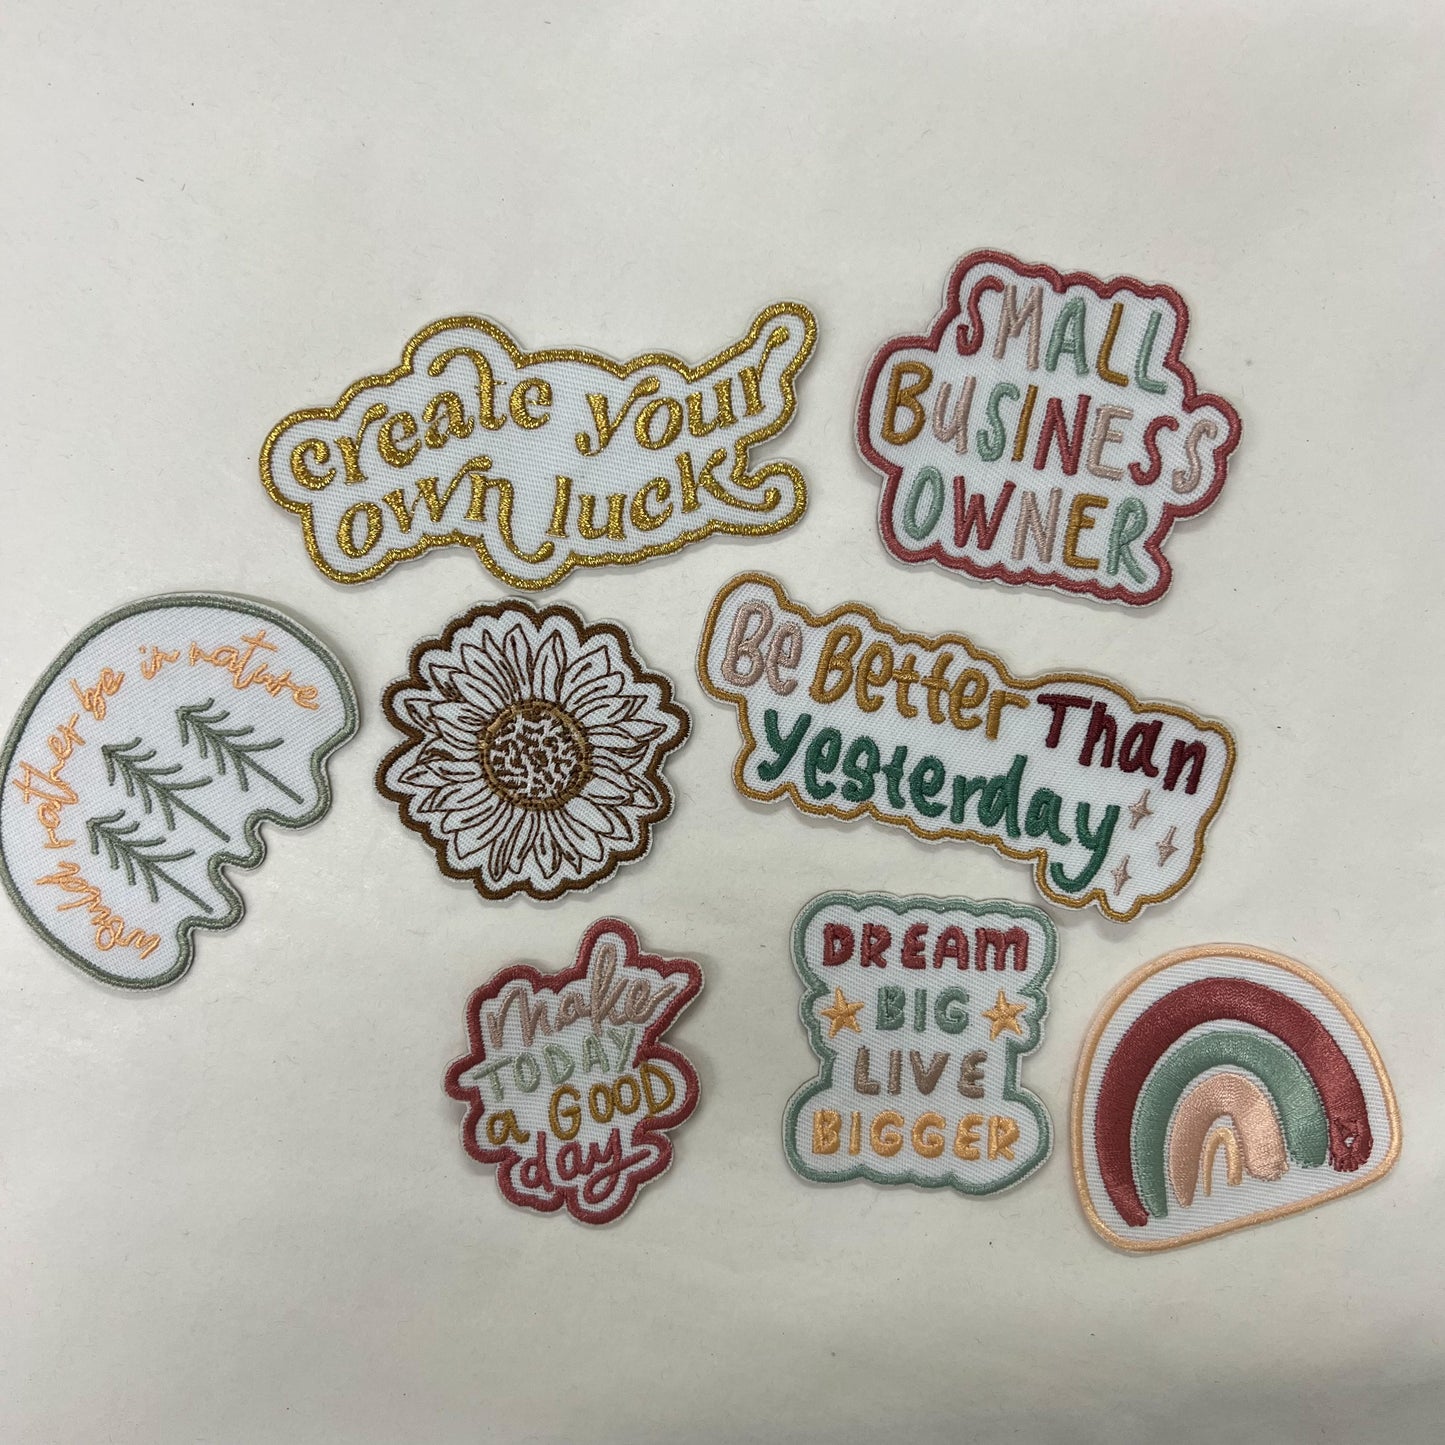 Embroidered Patches! Rainbow, small business owner, nature, sunflower etc